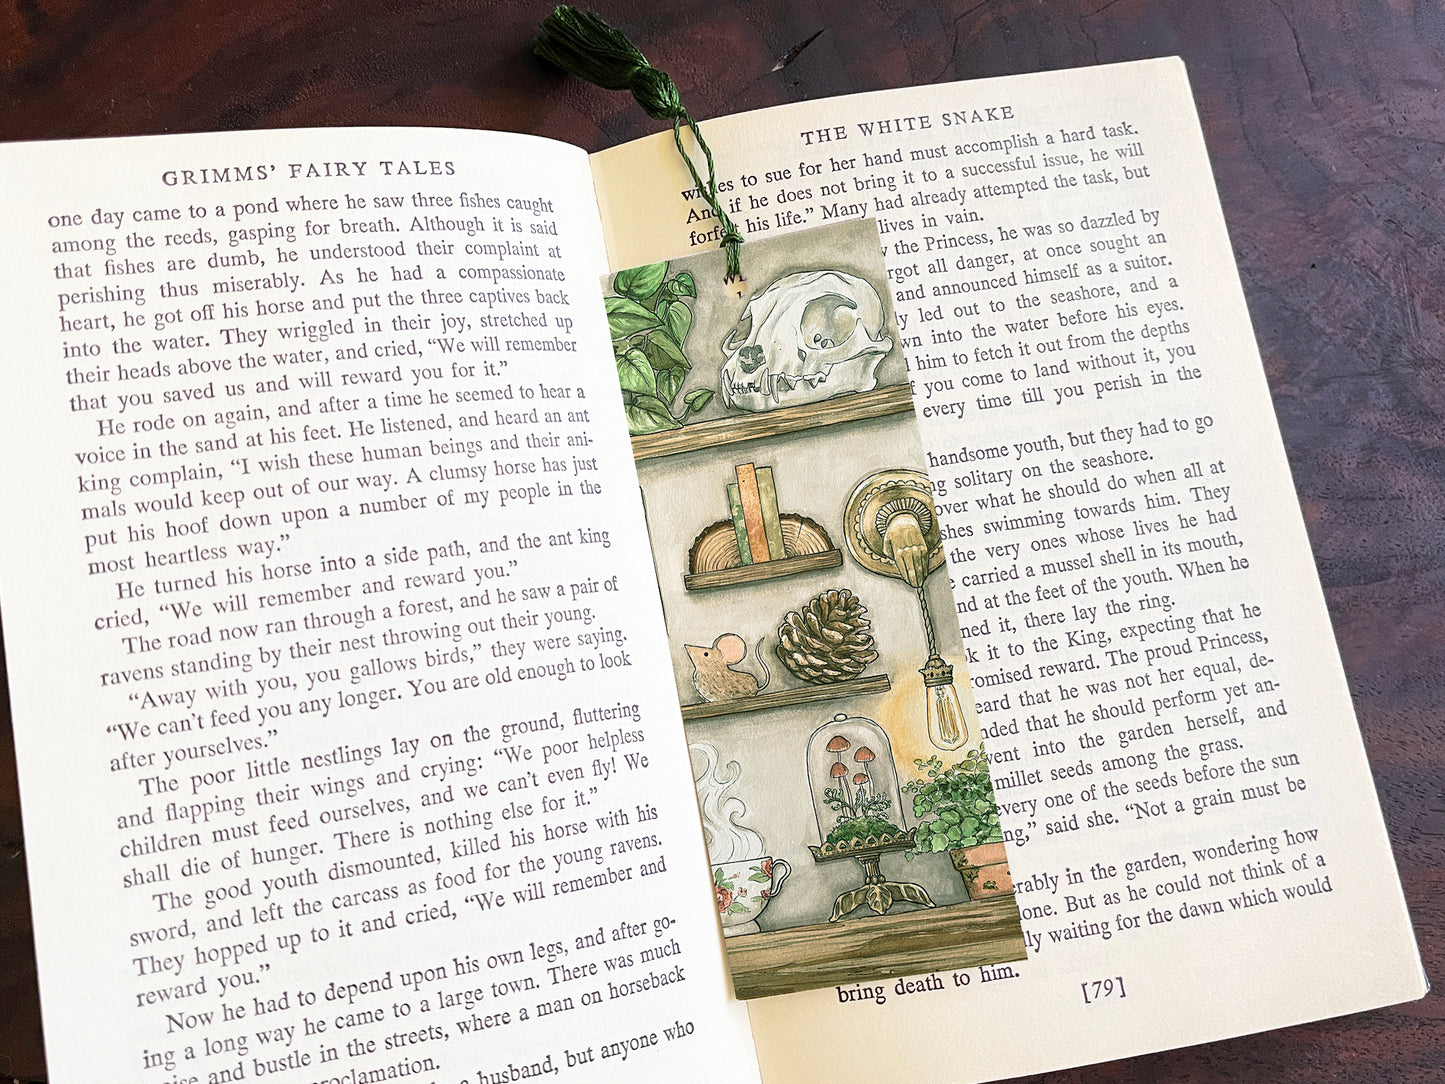 example of using spooky bookmark with a book